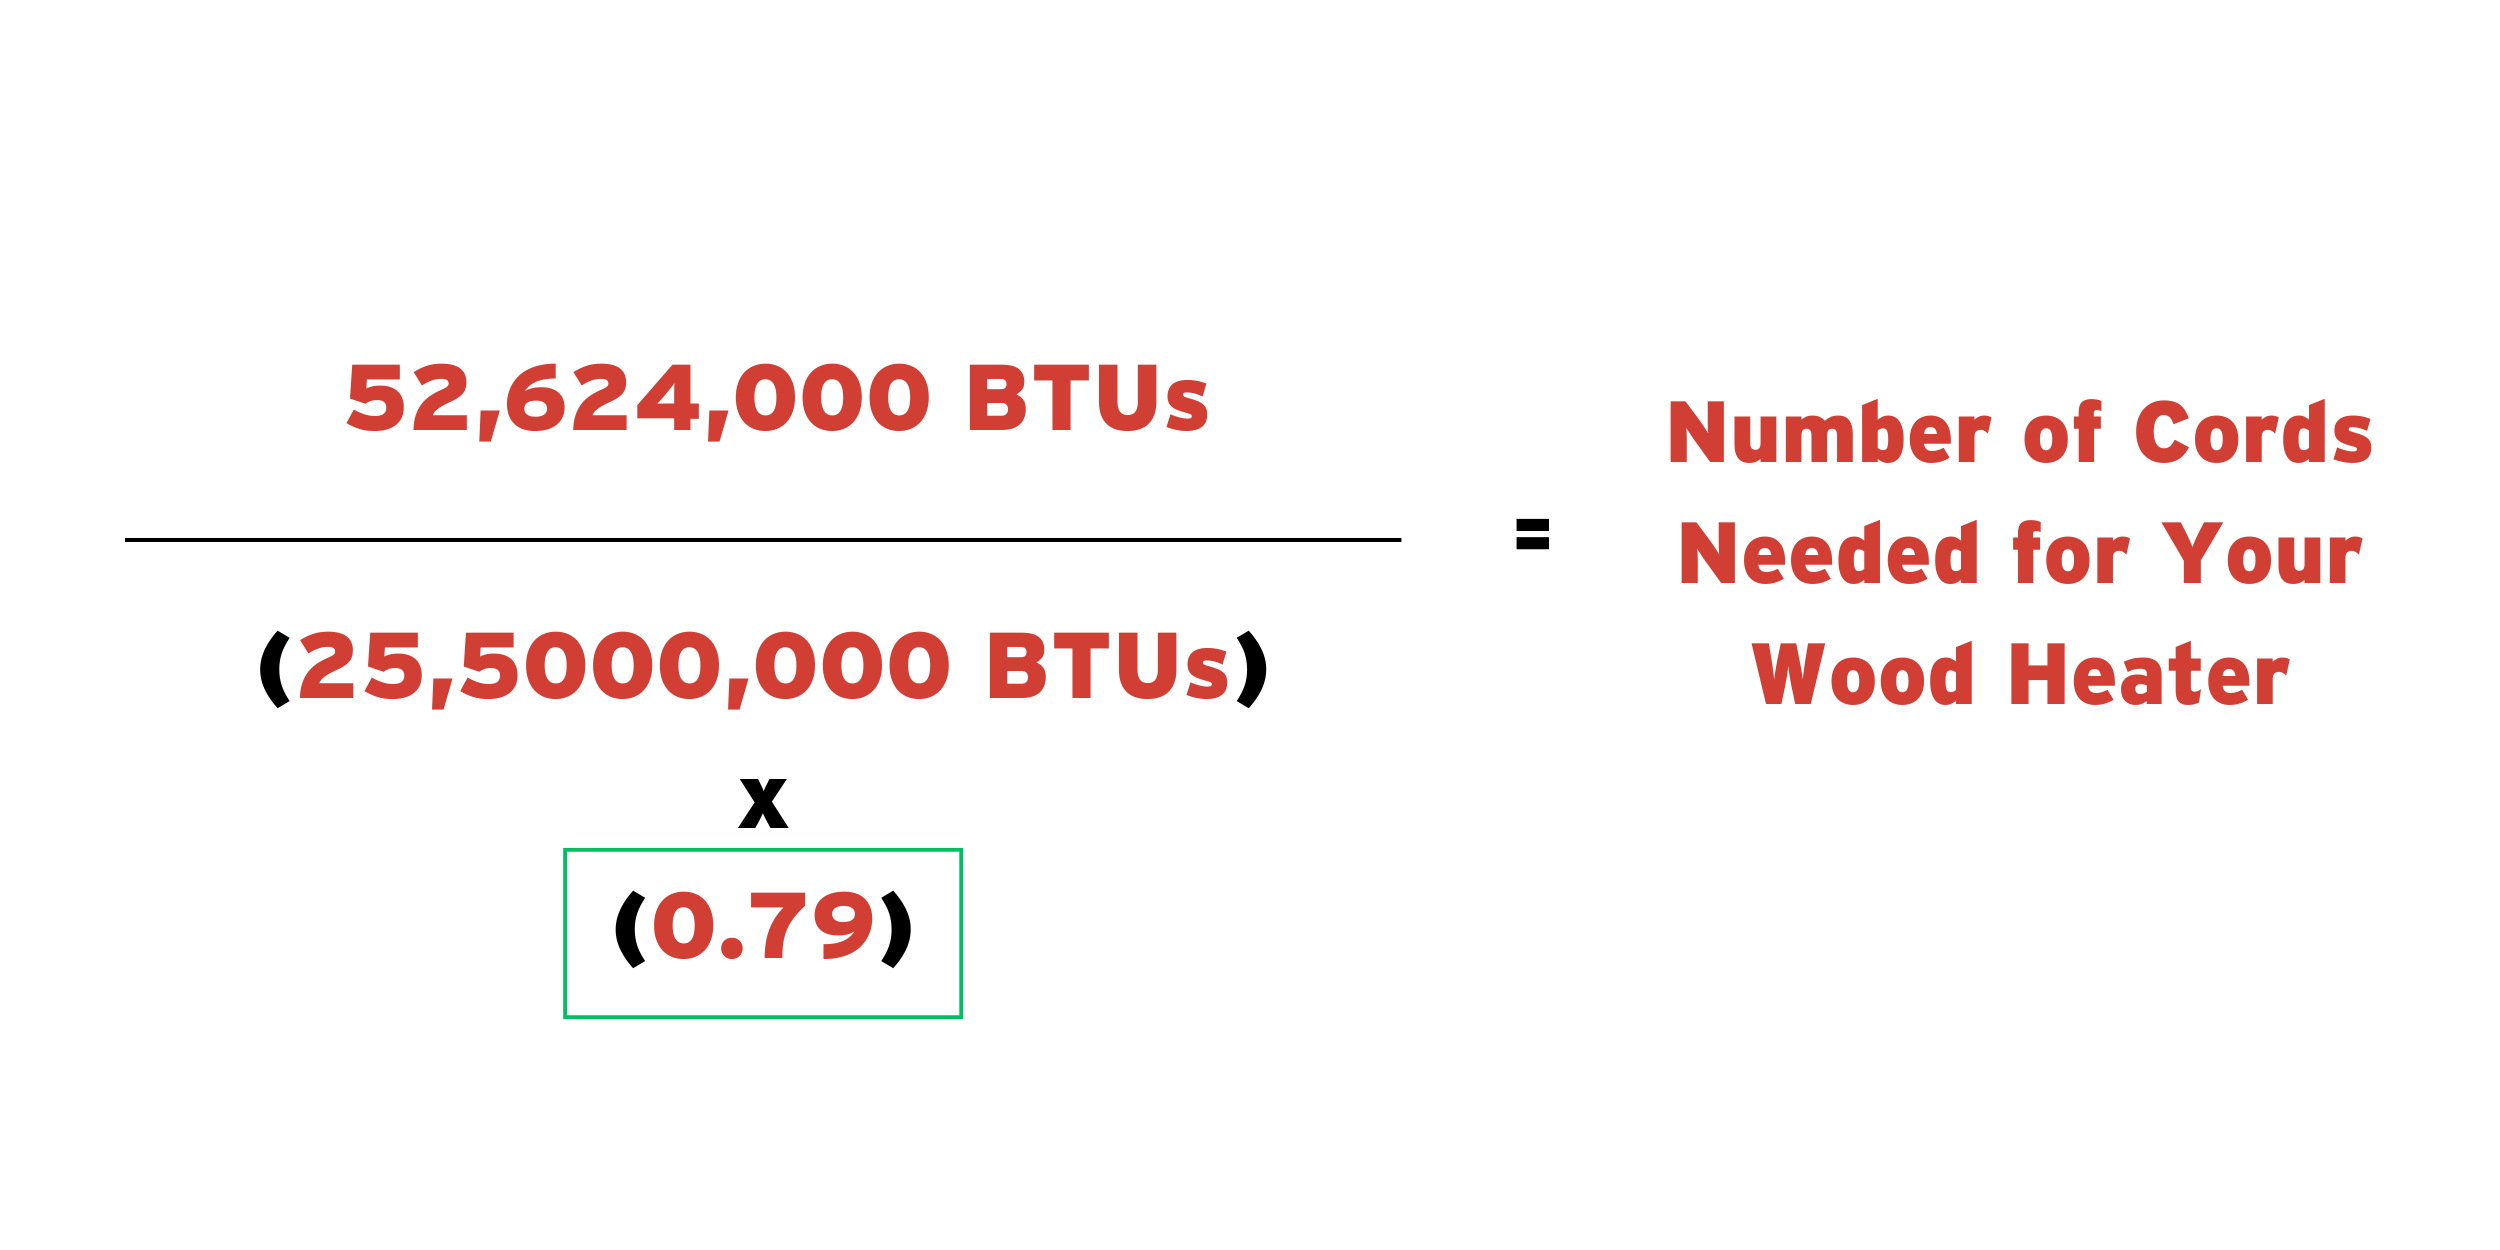 The formula for the number of cords of wood needed for a wood heater with 52,624,000 BTUs in the numerator and 25,500,000 BTUs times 0.79 in the denominator.